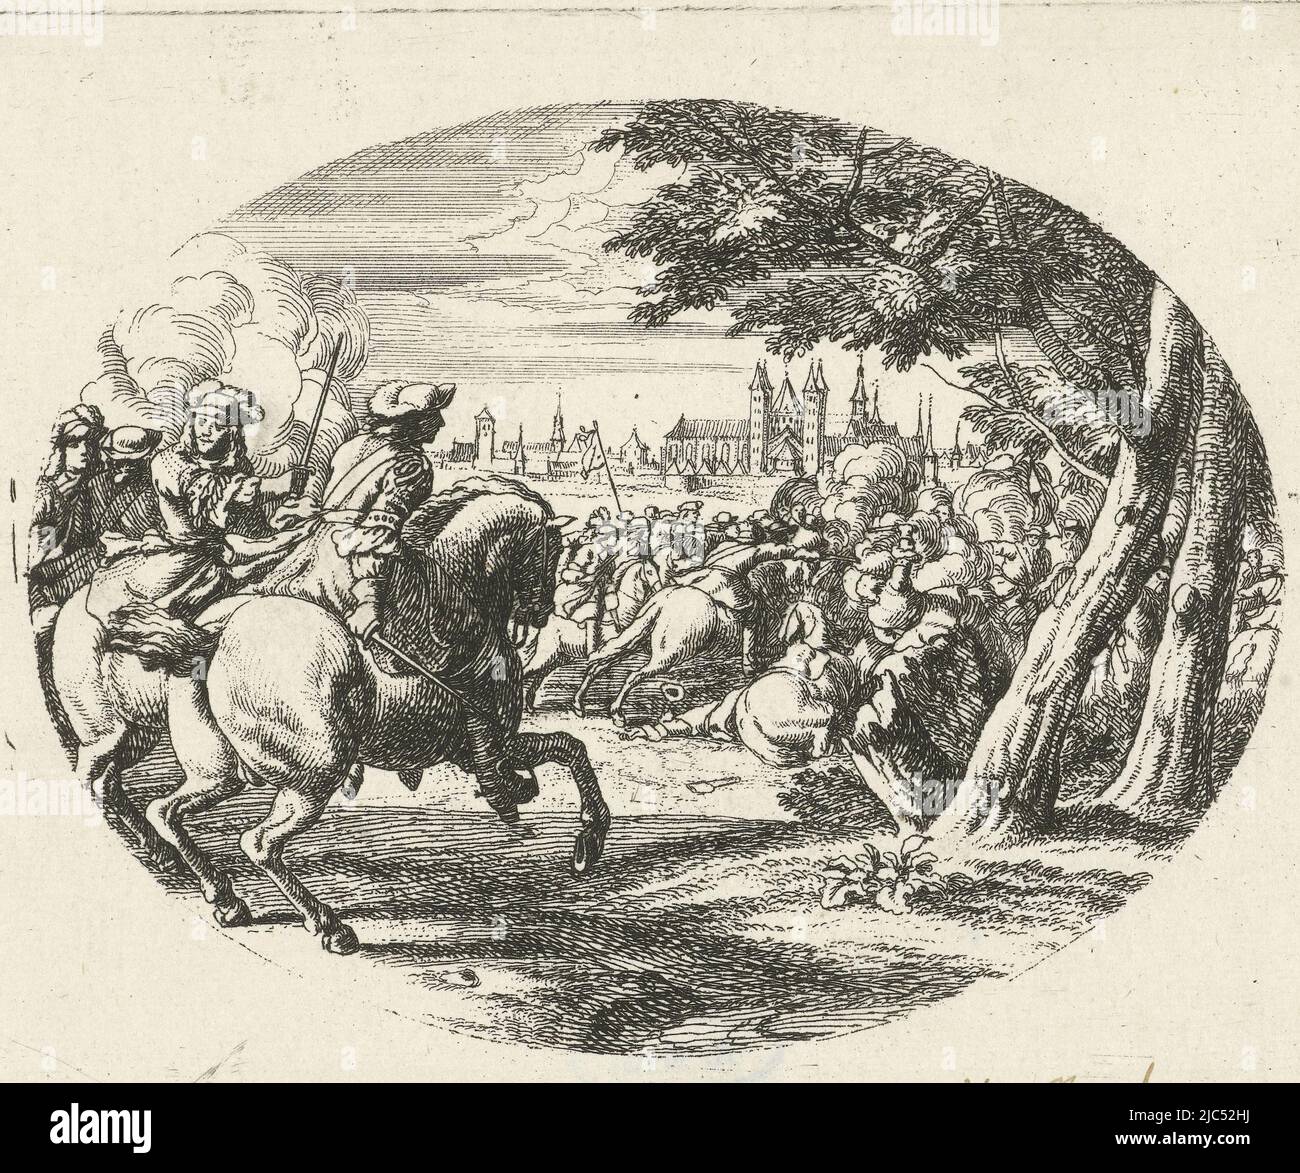 On the left two horsemen on horseback with swords drawn. Right an equestrian fight and on the horizon a city, Siege of a city Military representations from the life of Louis XIV, King of France (series title), print maker: Jan van Huchtenburg, (mentioned on object), Adam Frans van der Meulen, unknown, 1674 - 1733, paper, etching, h 100 mm × w 138 mm Stock Photo